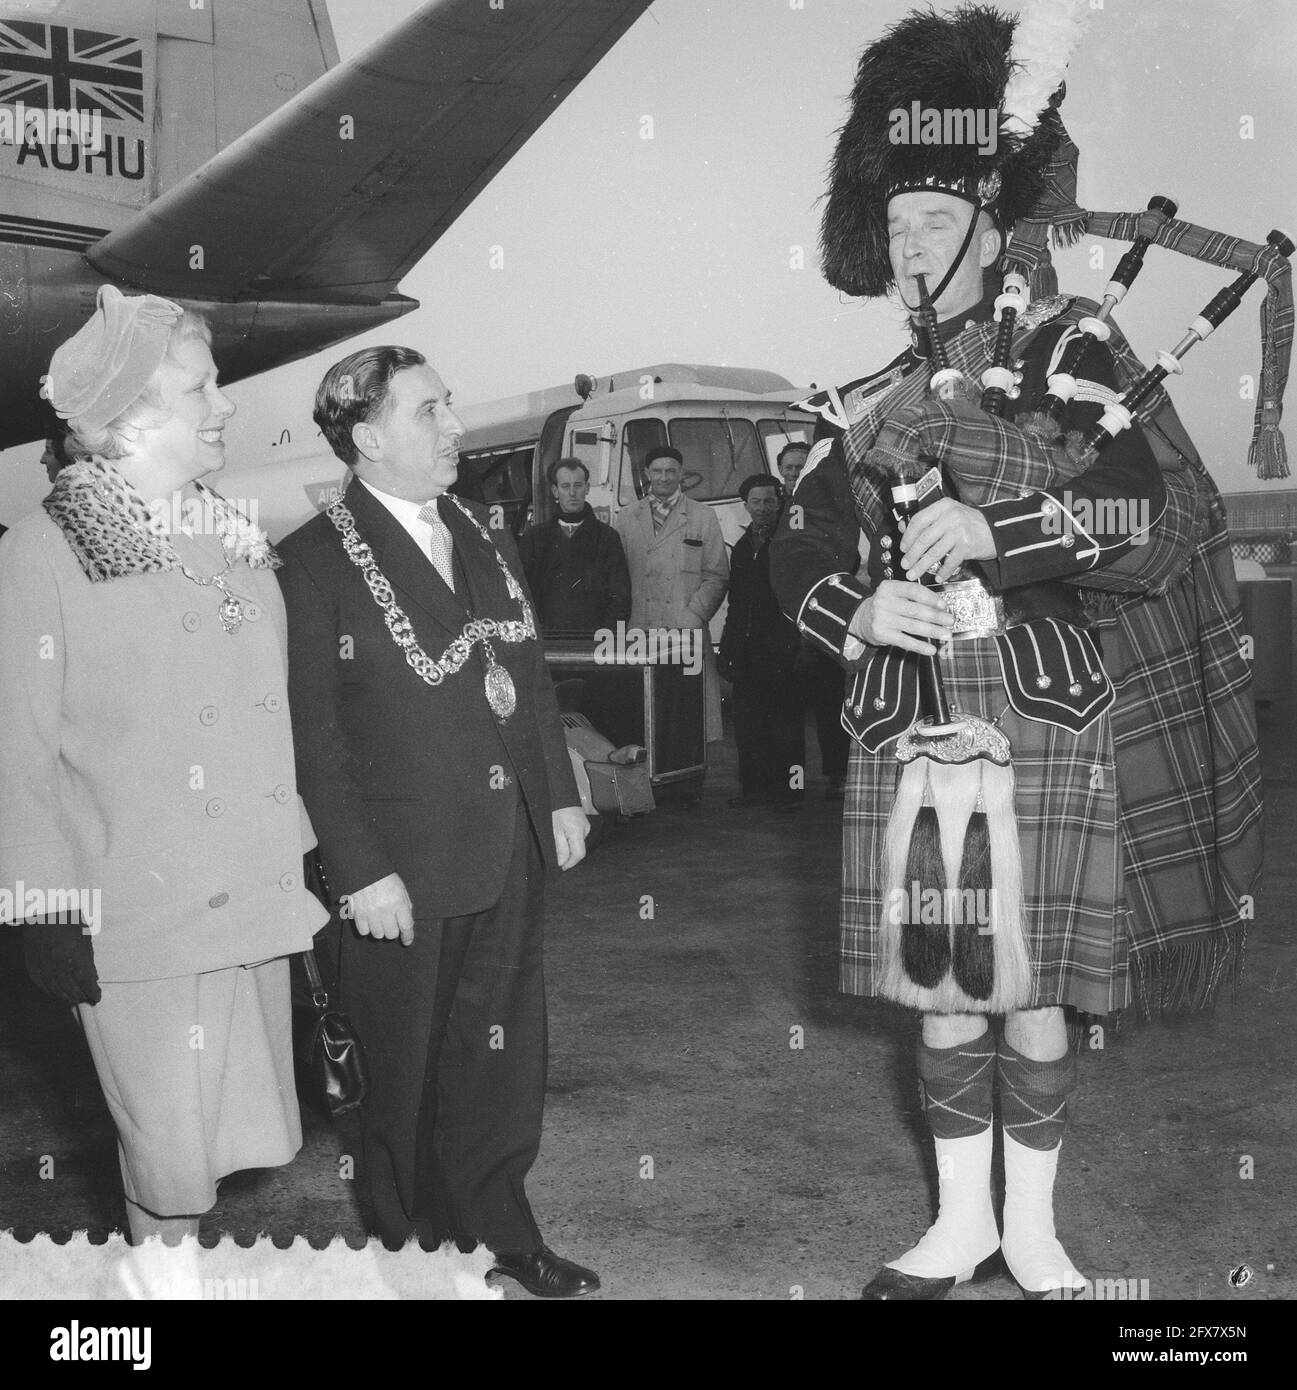 Arrival of Lord Provost of Glasgow at Schiphol Airport, from left to right Mr. Myer Galapern, Mr. Myer Galpern and bagpiper, December 6, 1959, ARRIVAL, CONFERENCE, bagpipers, The Netherlands, 20th century press agency photo, news to remember, documentary, historic photography 1945-1990, visual stories, human history of the Twentieth Century, capturing moments in time Stock Photo